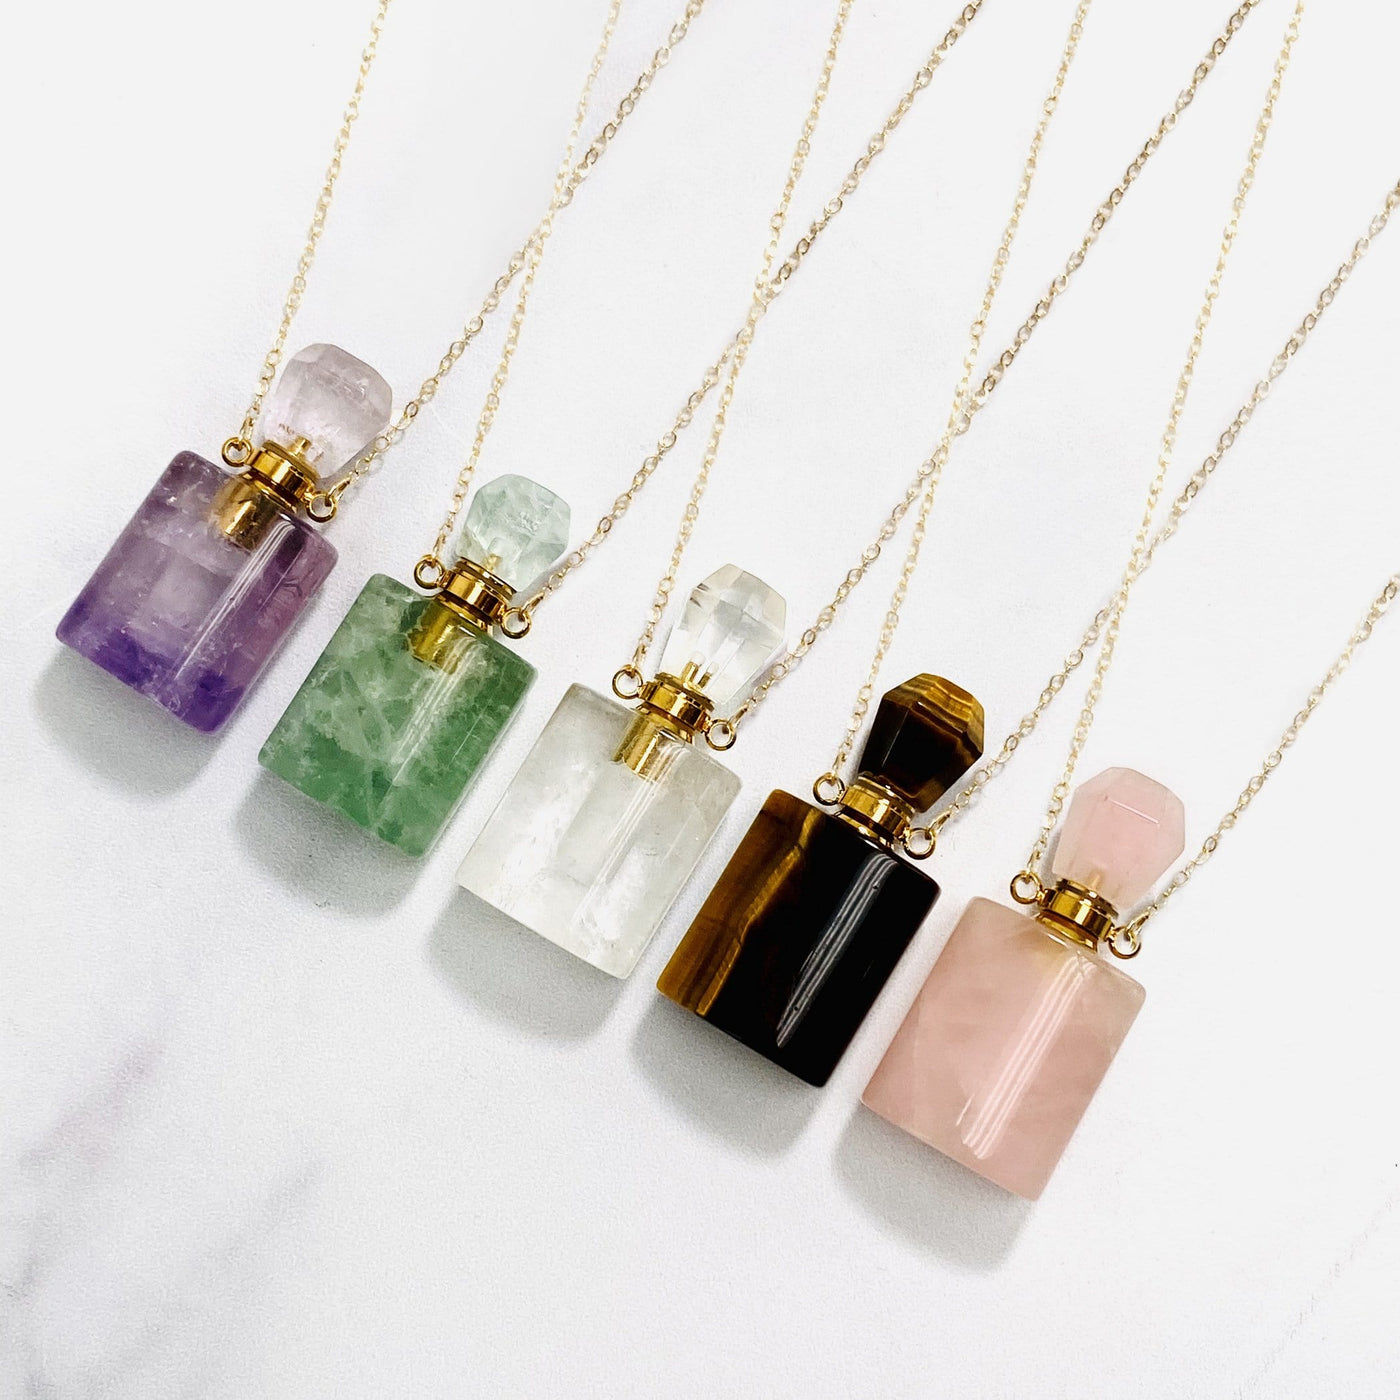 Gemstone Bottle Pendant Connector with Electroplated Gold Bails come in amethyst green fluorite crystal quartz tiger's eye rose quartz 